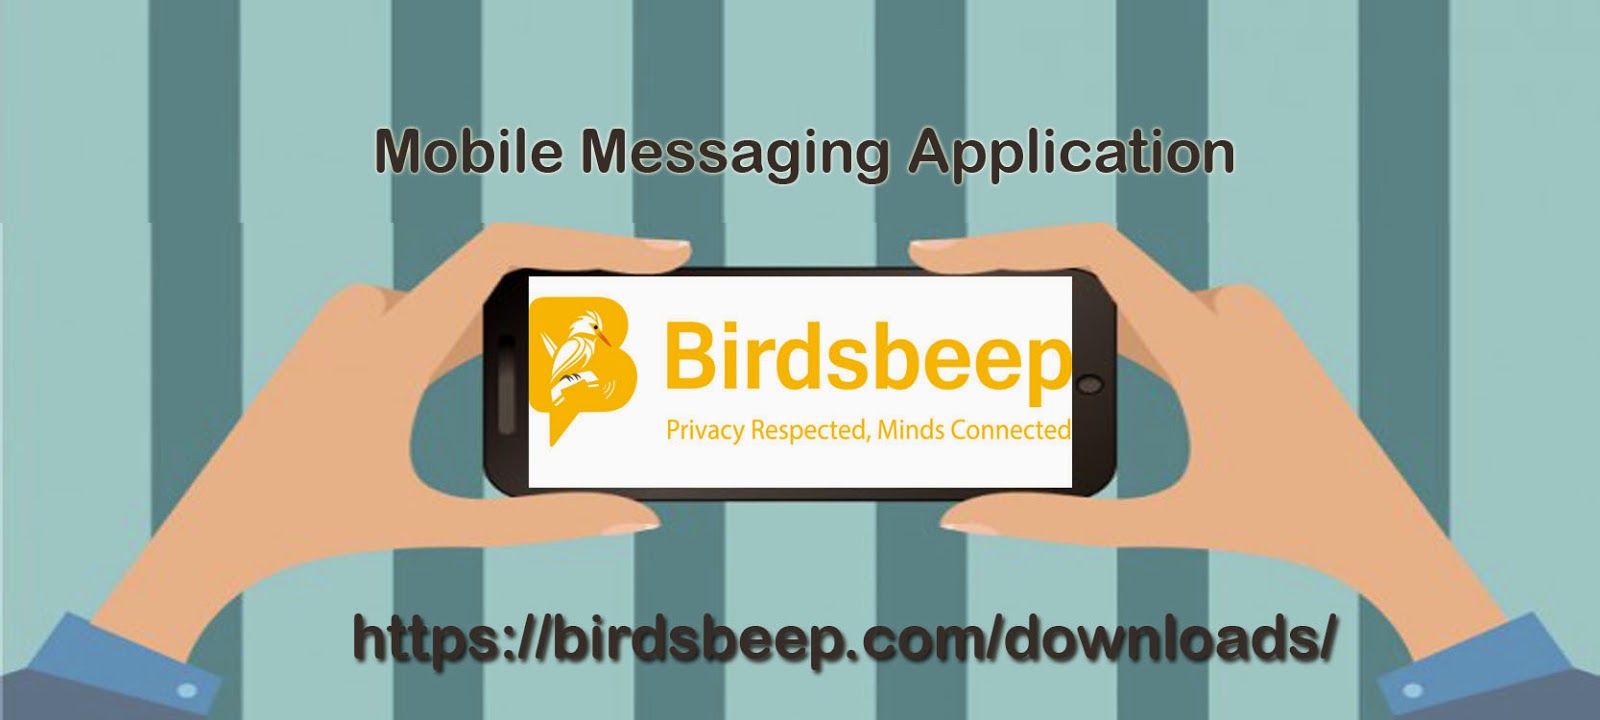 mobile messaging application